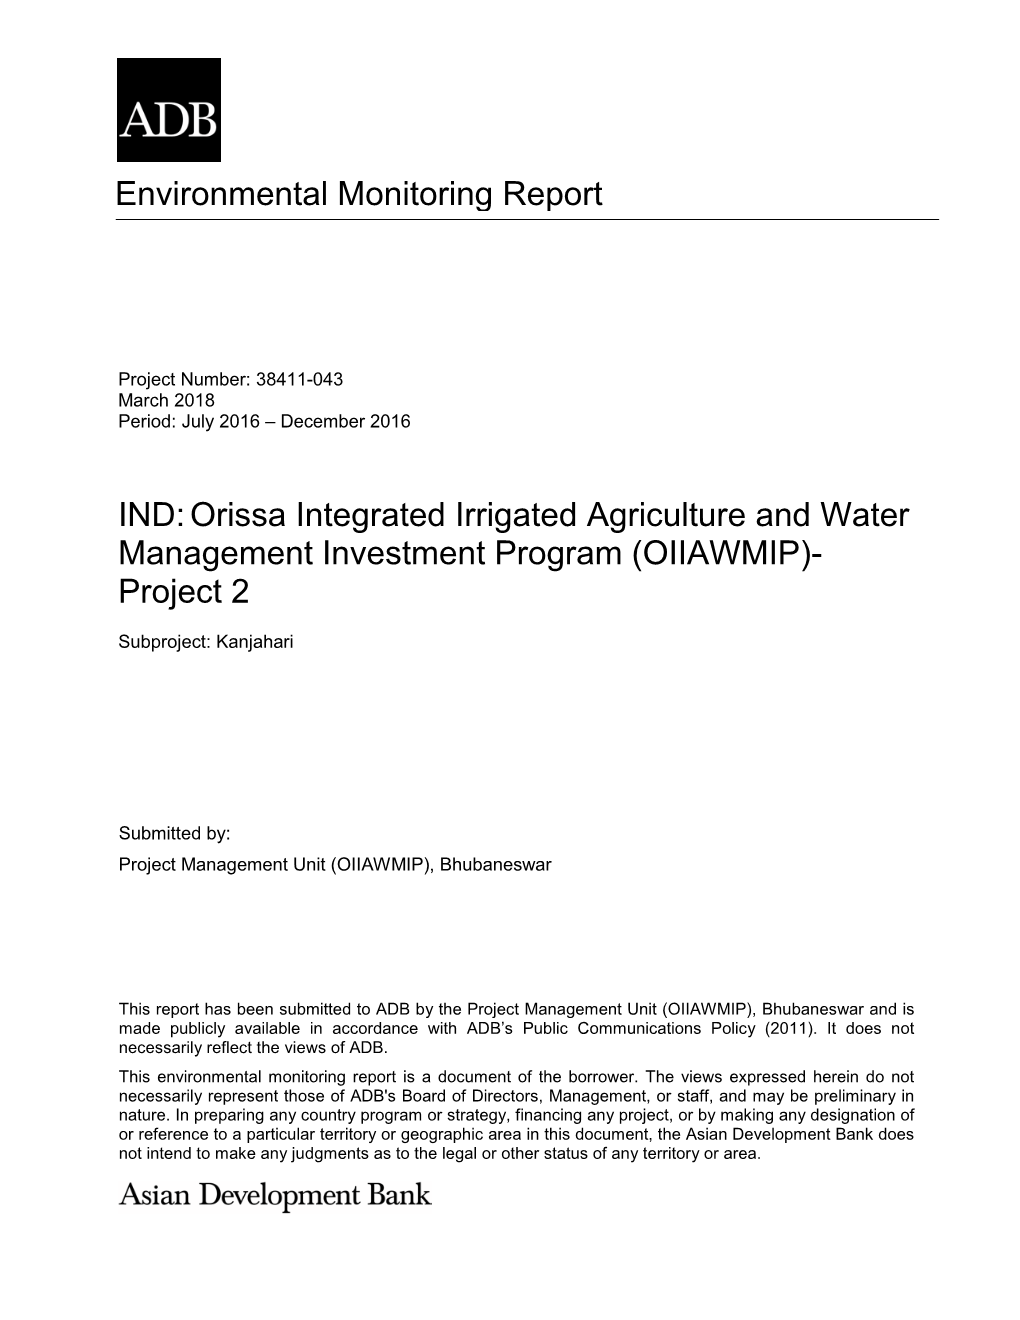 38411-043: Orissa Integrated Irrigated Agriculture and Water Management Investment Program